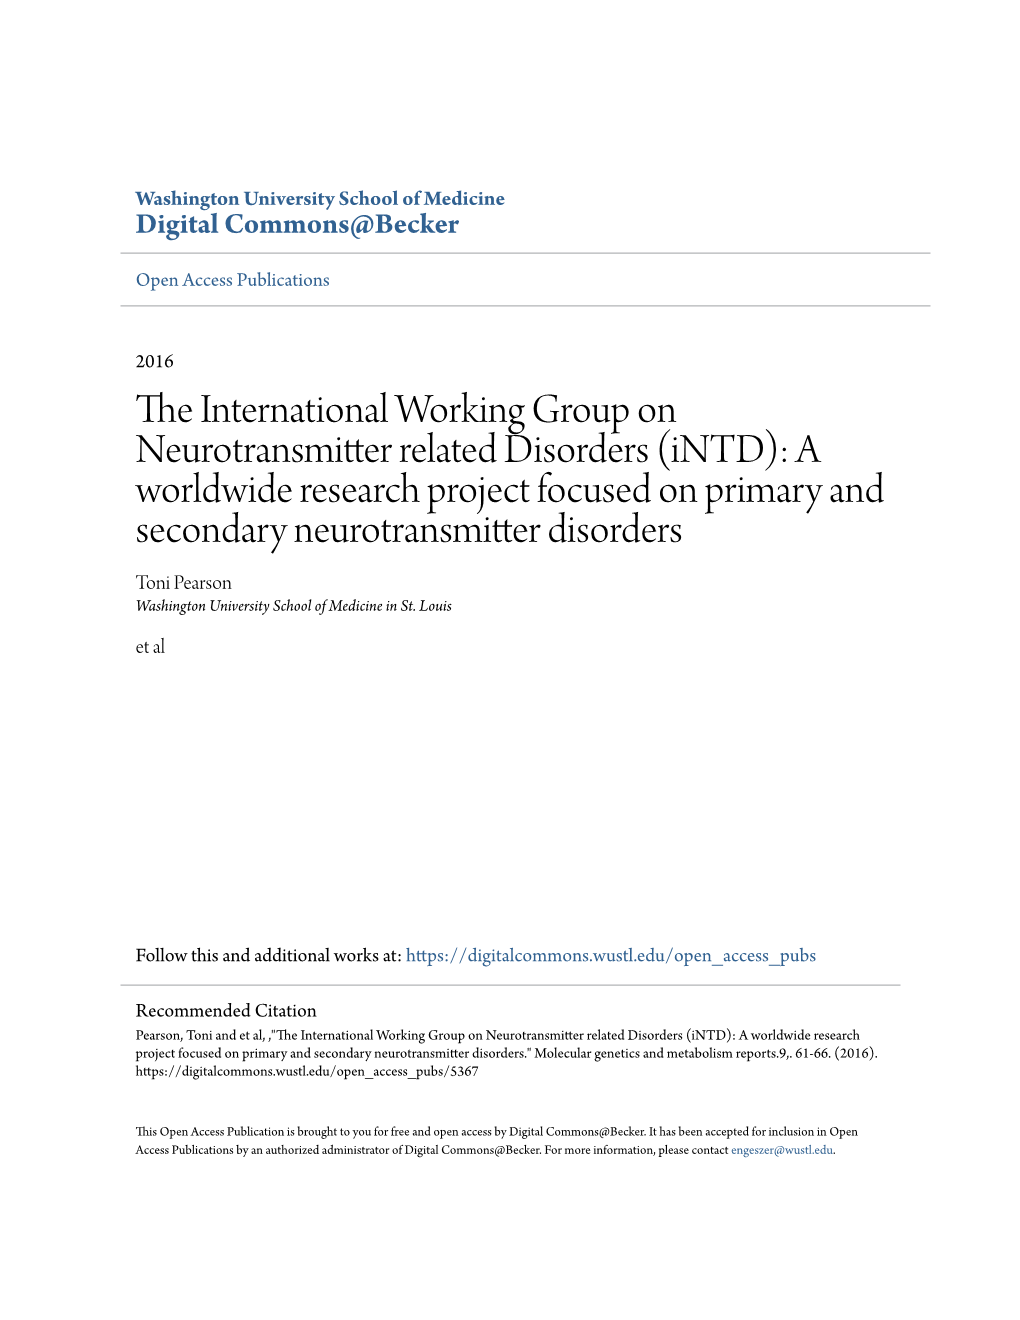 The International Working Group on Neurotransmitter Related Disorders (Intd): a Worldwide Research Project Focused on Primary and Secondary Neurotransmitter Disorders